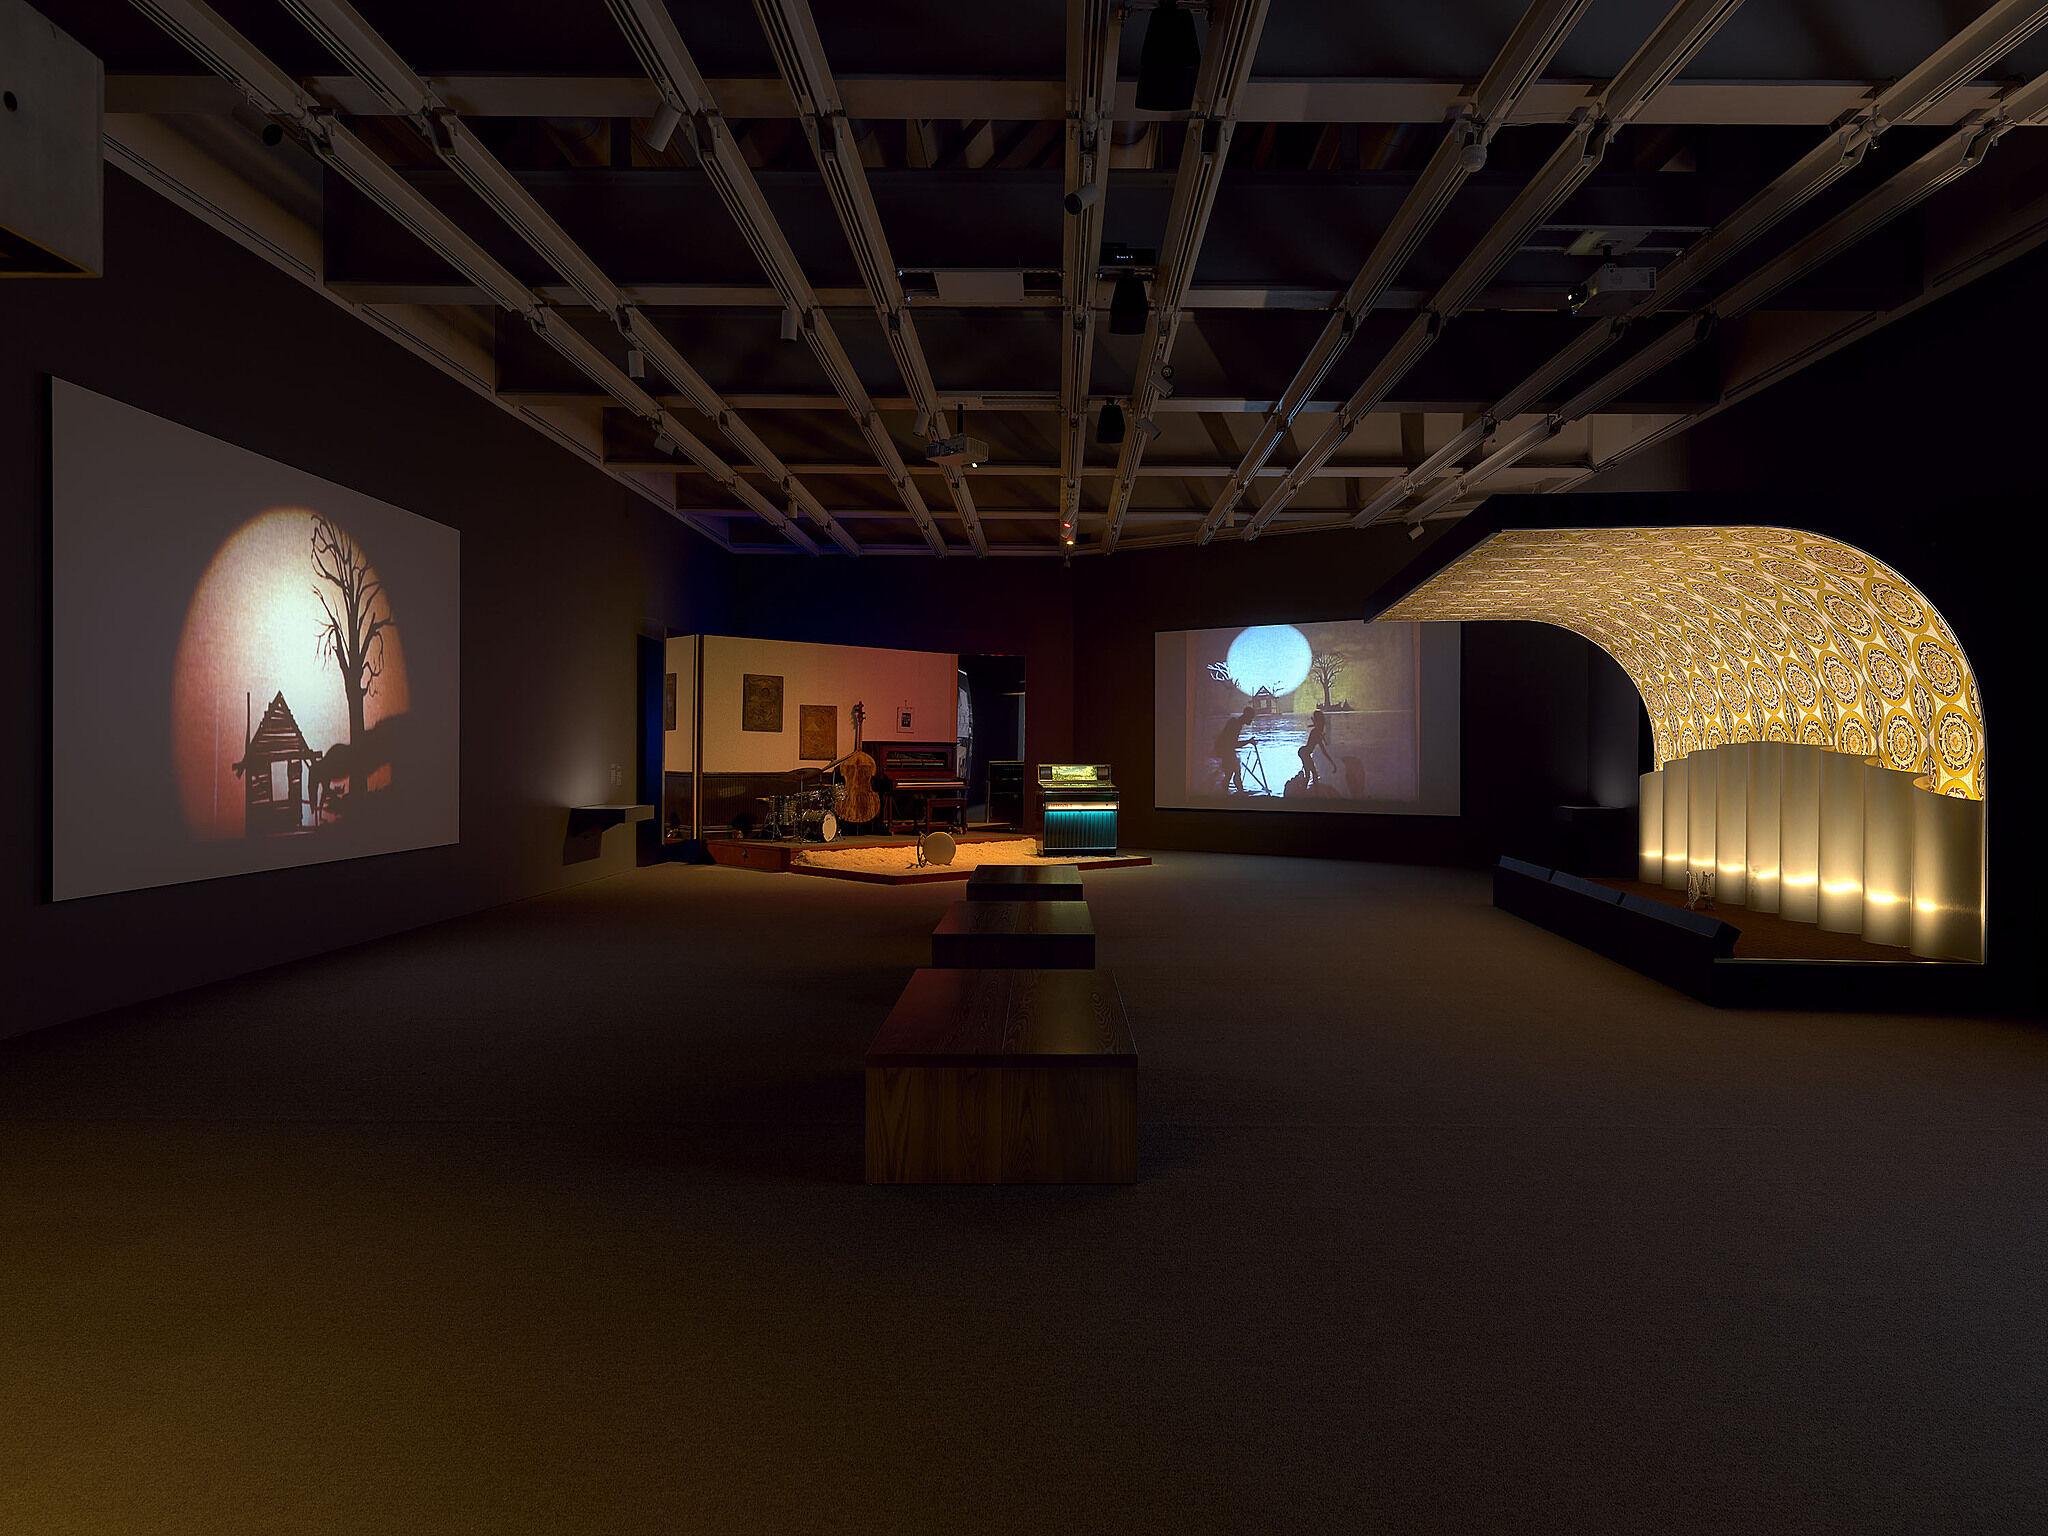 An image of the Whitney galleries with various video projections, stages, and musical instruments